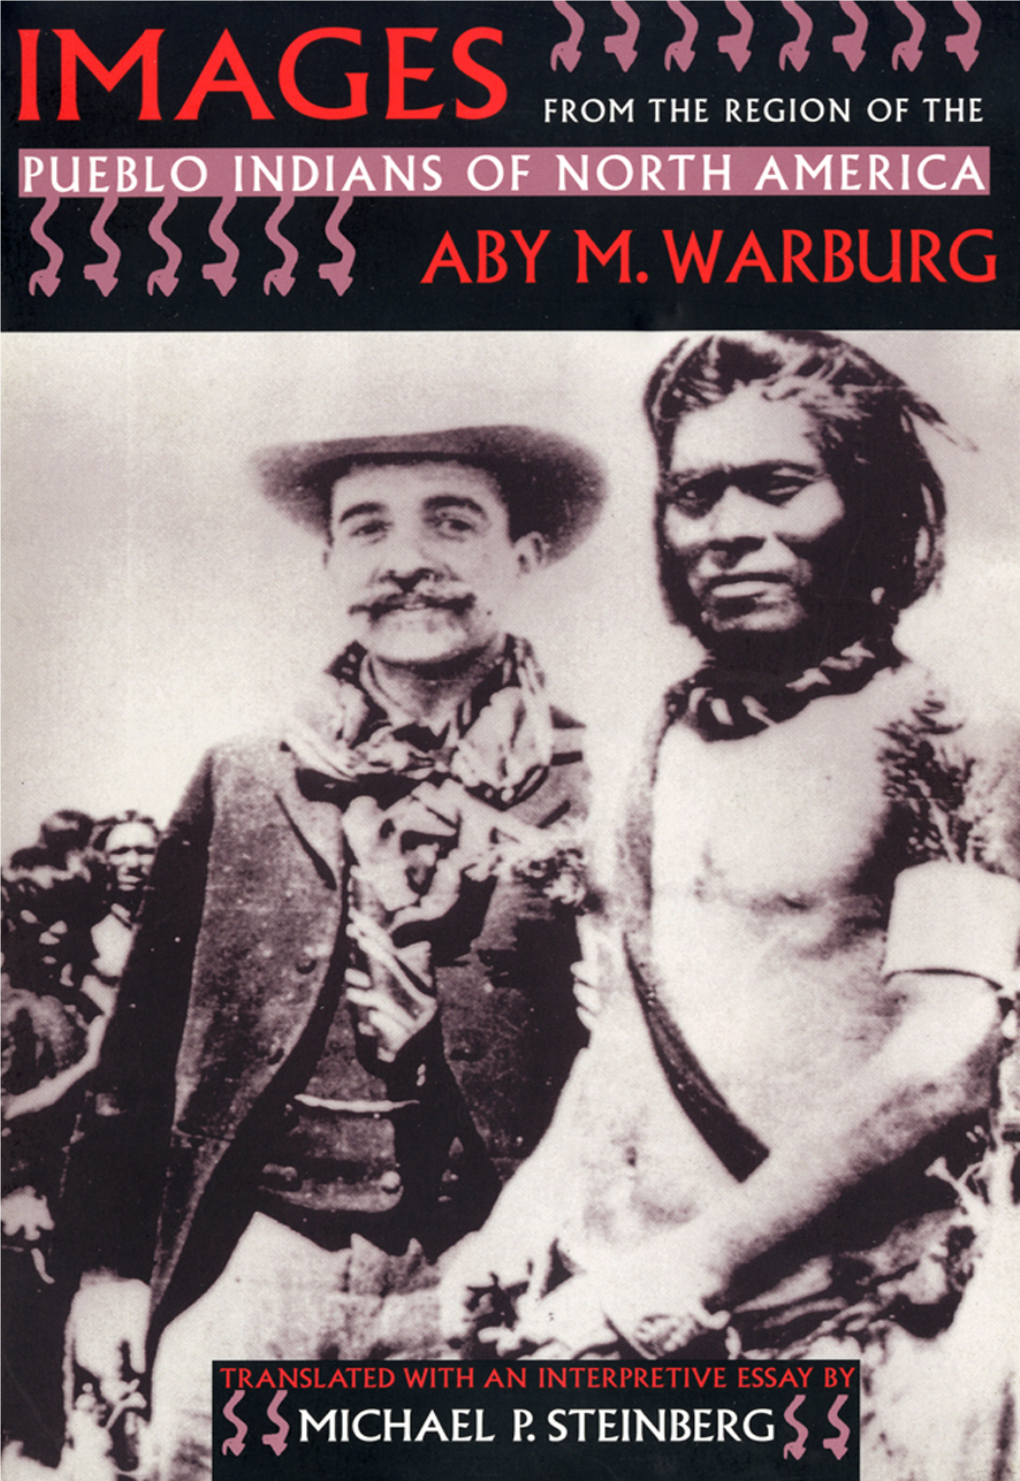 Images from the Region of the Pueblo Indians of North America / Aby M